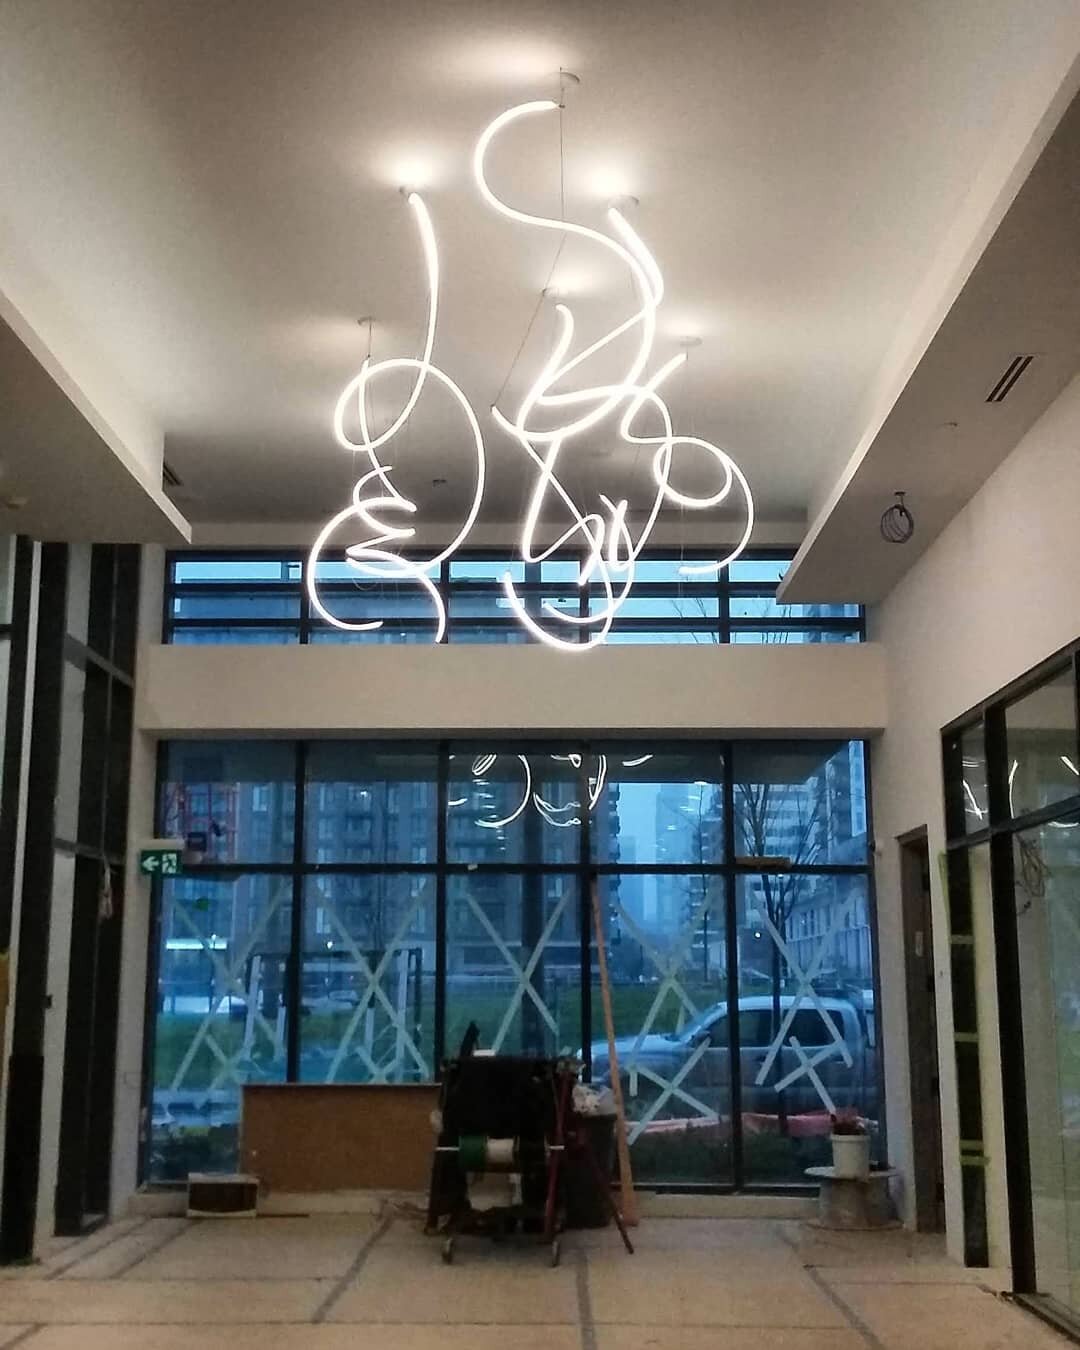 This is a progress shot of a new light installation for Daniels Evolv building in Toronto. Installation to be completed in January. 

@evolvrentals #evolv #Daniels #lovewhereyoulive #regentpark #toronto #torontolife #lovetoronto #light #lightart #lig